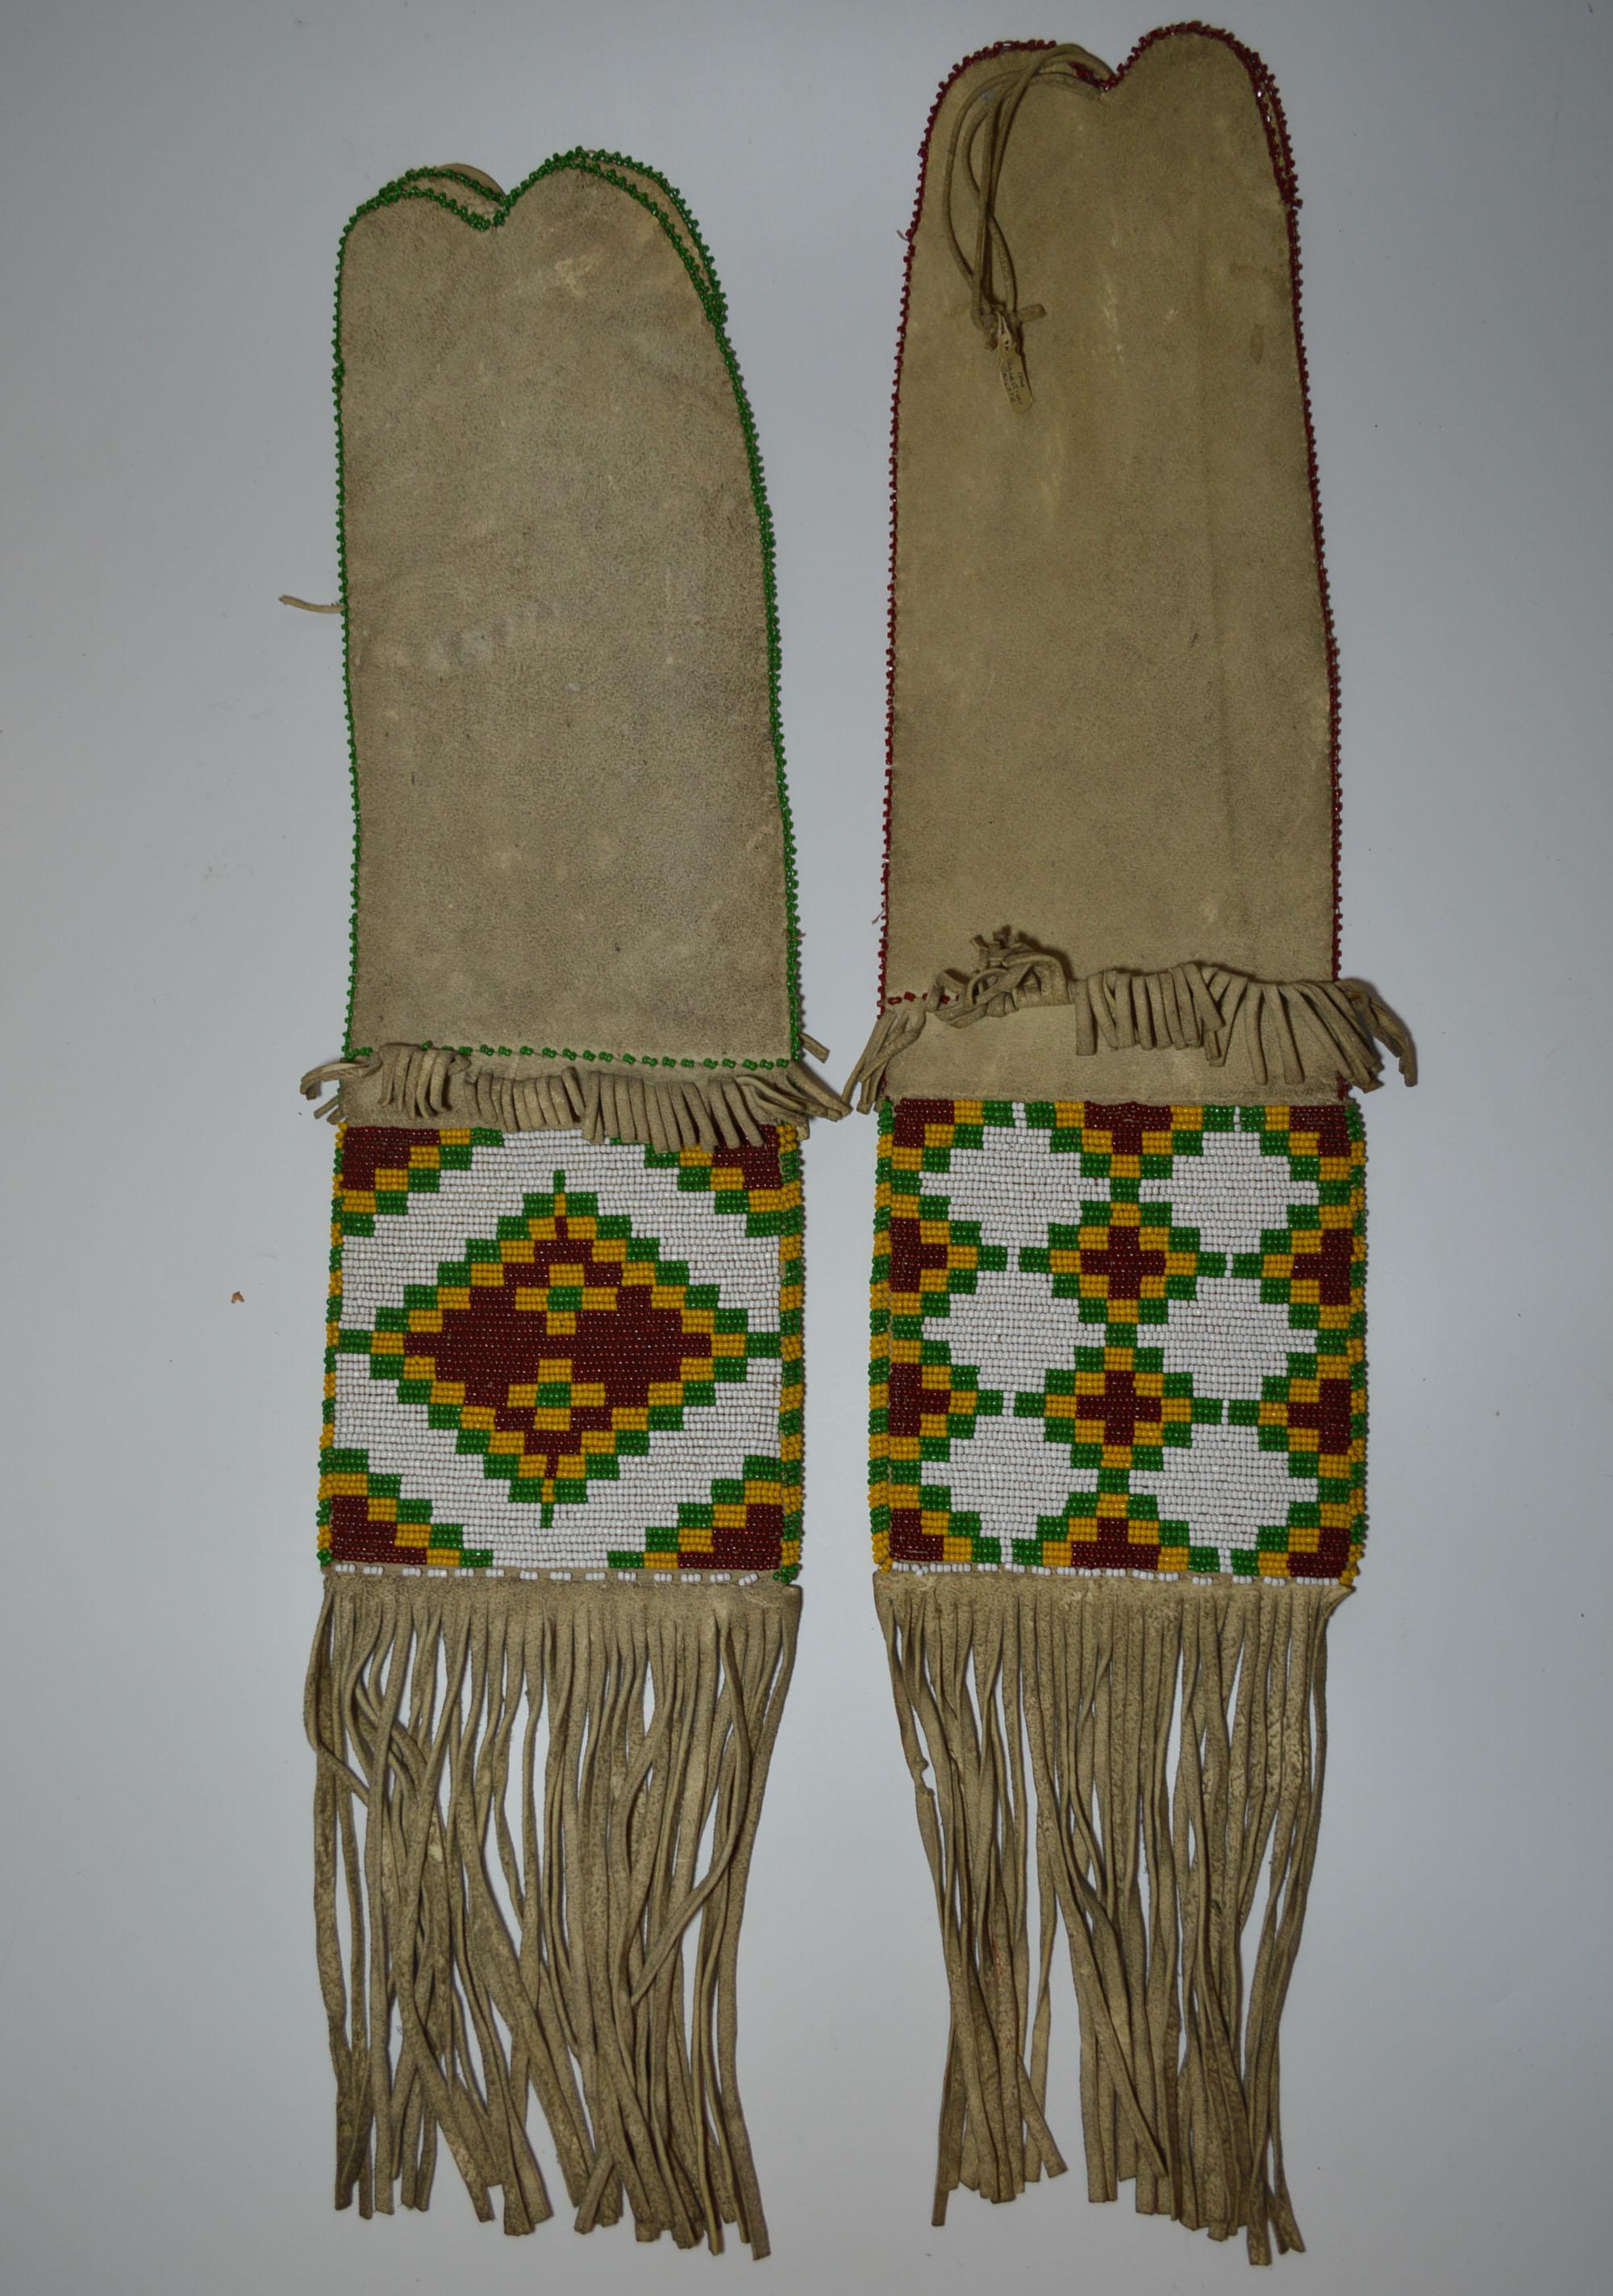 A fine pair of old Native American Indian Sarcee (Tsuut'ina ) beaded pipe bags. 
Buck skin with loom beaded panels of white green red and yellow beads.
in geometric designs on each side of the bags.
The fringes with red and green cut beads.
Fine